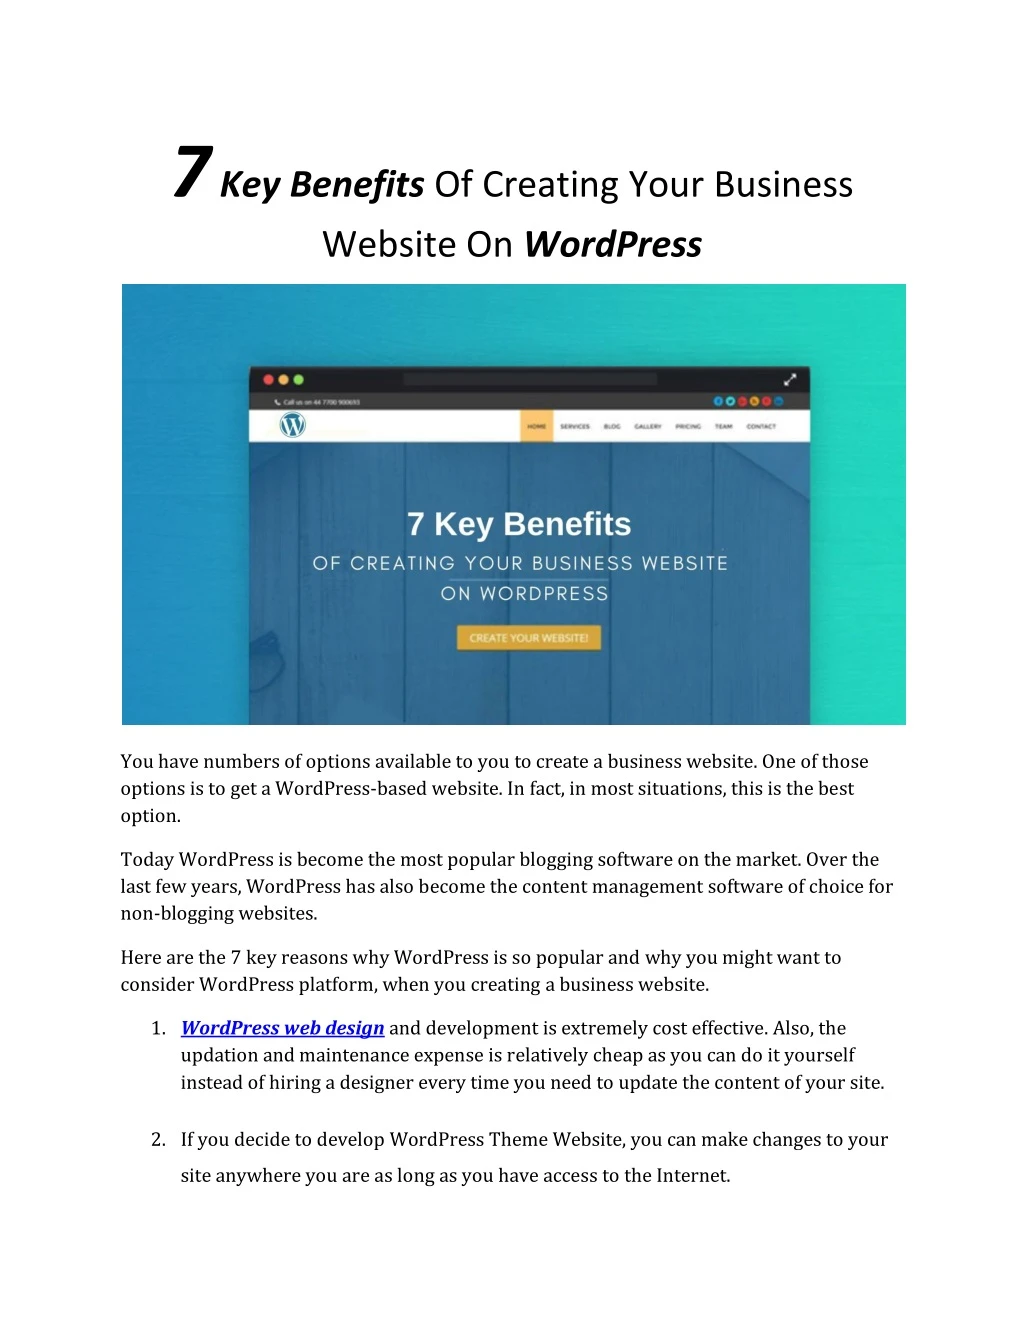 7 key benefits of creating your business website